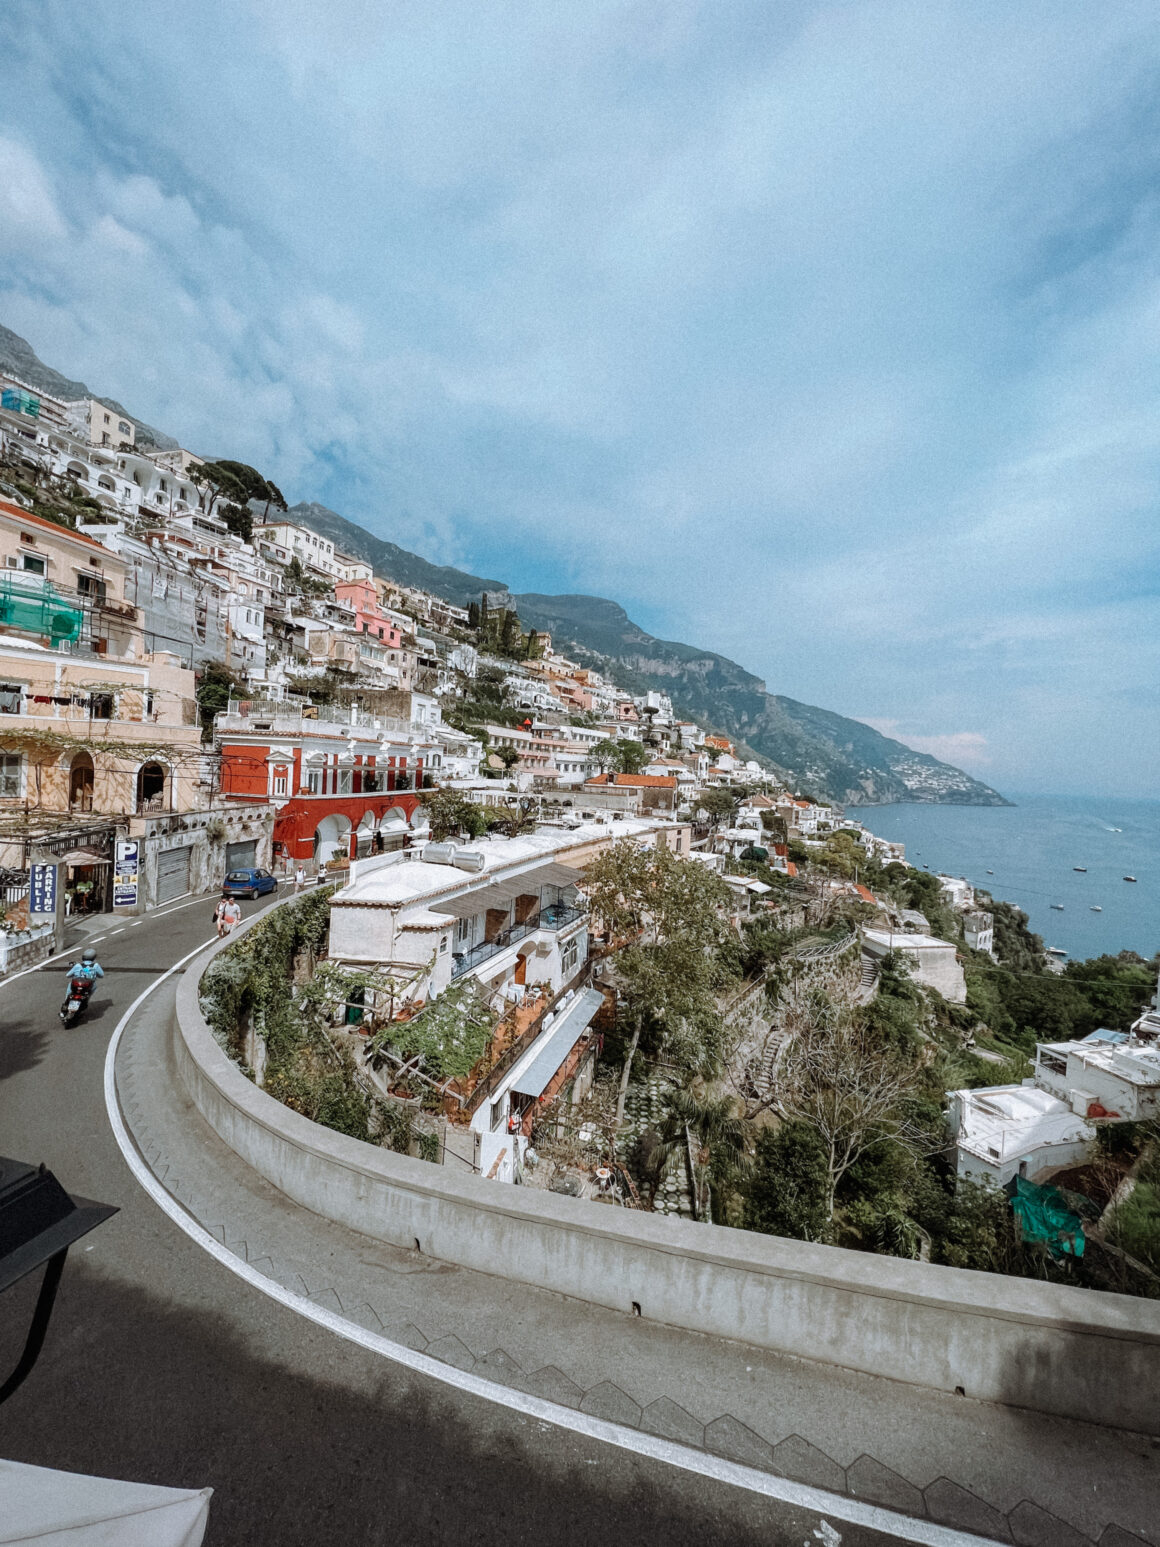 The winding streets of Positano, the perfect place to ride a scooter, one of the best things to do in Positano